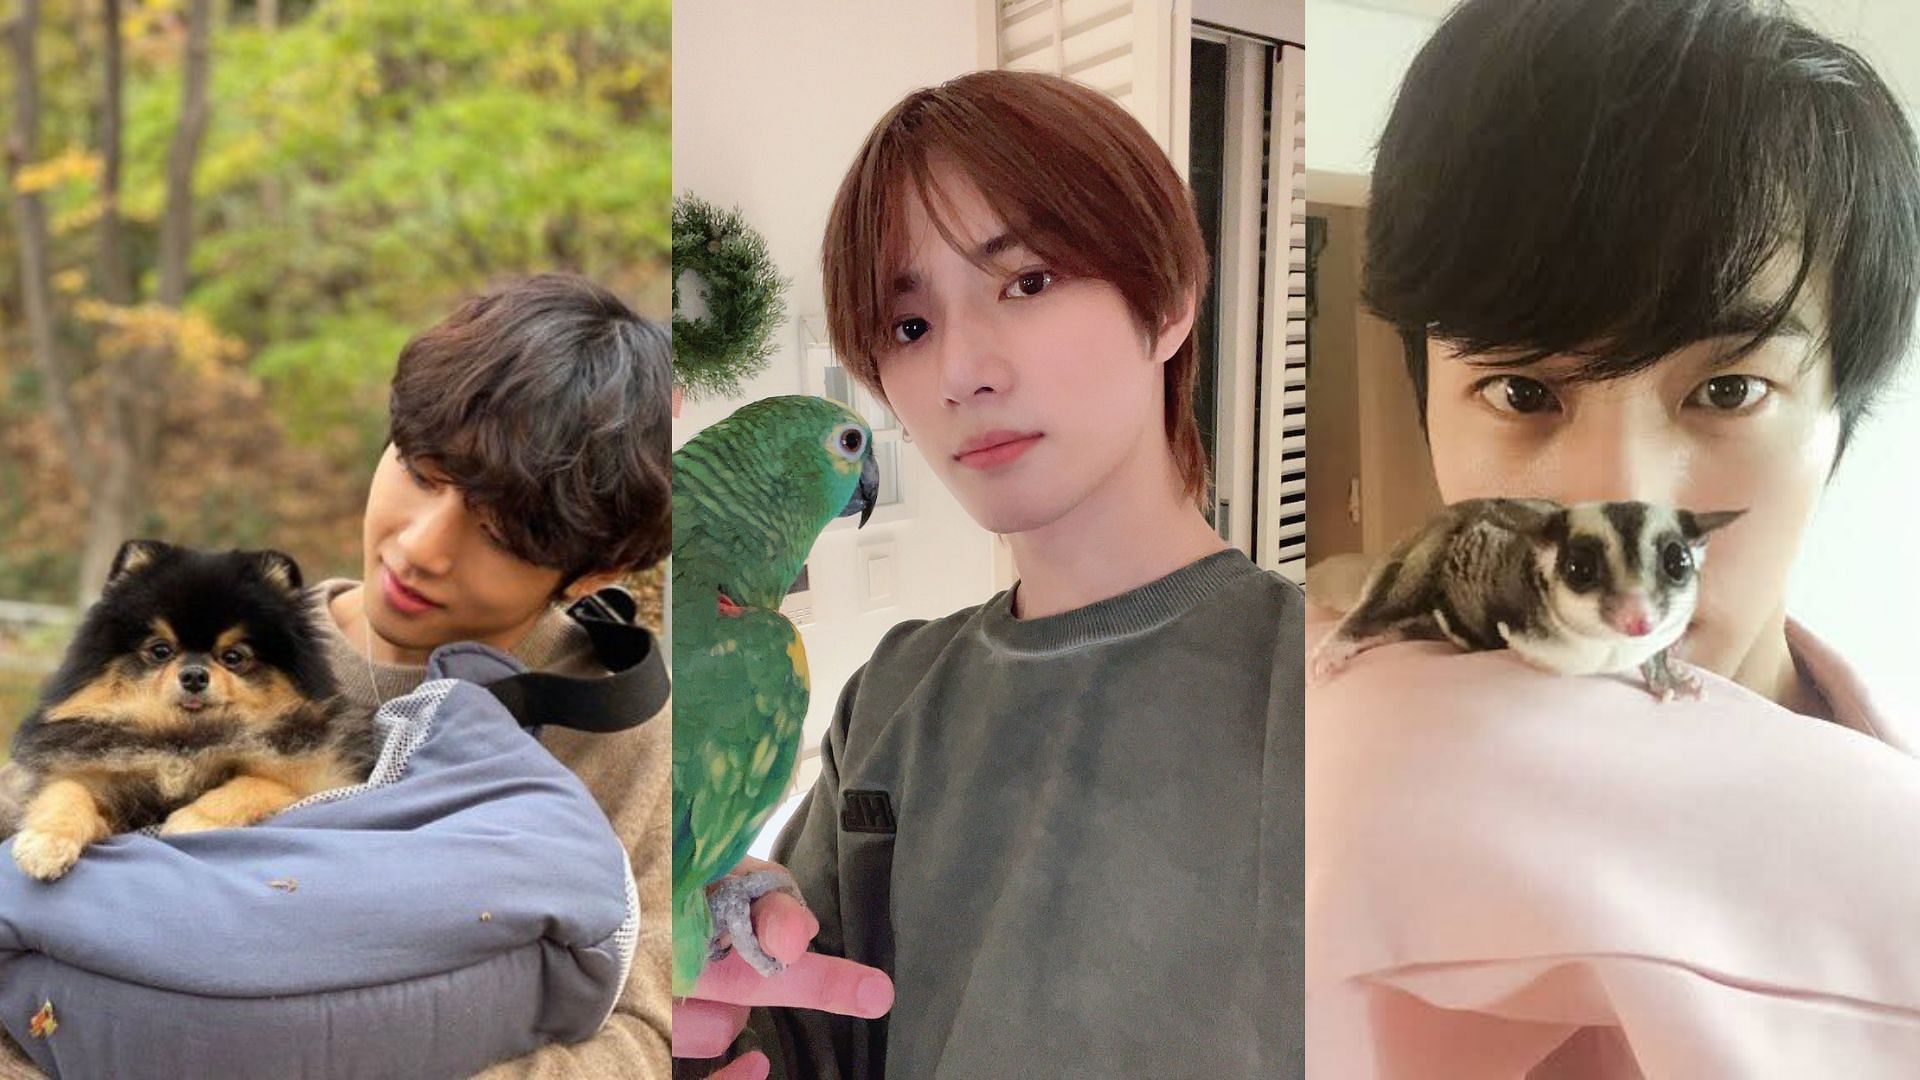 BTS&#039; V and Yeontan, TXT&#039;s Beomgyu and Toto, and BTS&#039; Jin and Odeng (Images via @beomjunhourly/Twitter, @itsallforjin/Twitter, and @ot7isbest/Twitter)